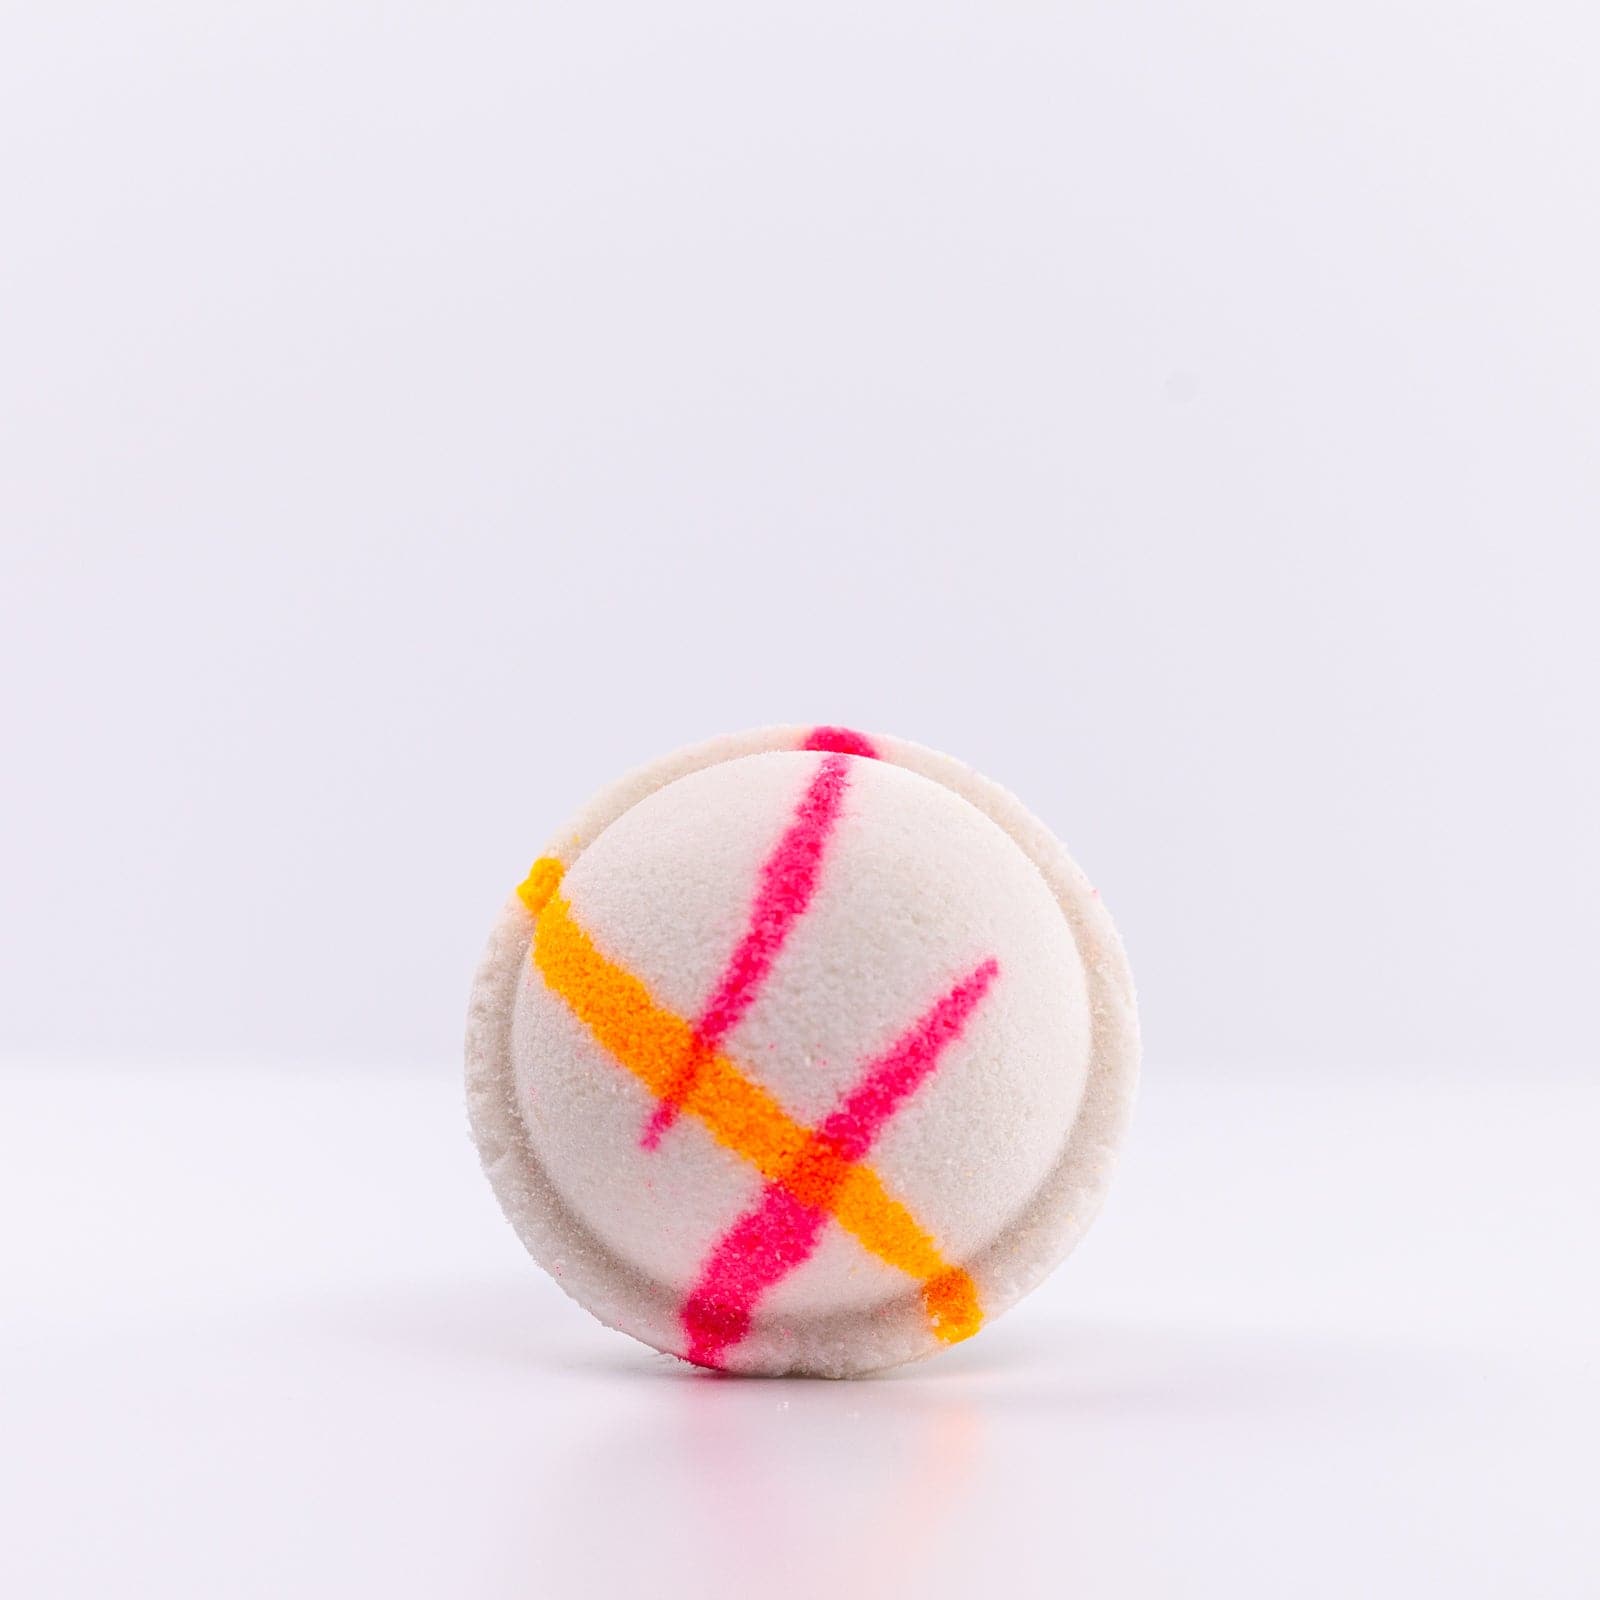 Island Nectar Bath Bomb with pink and orange design against white background